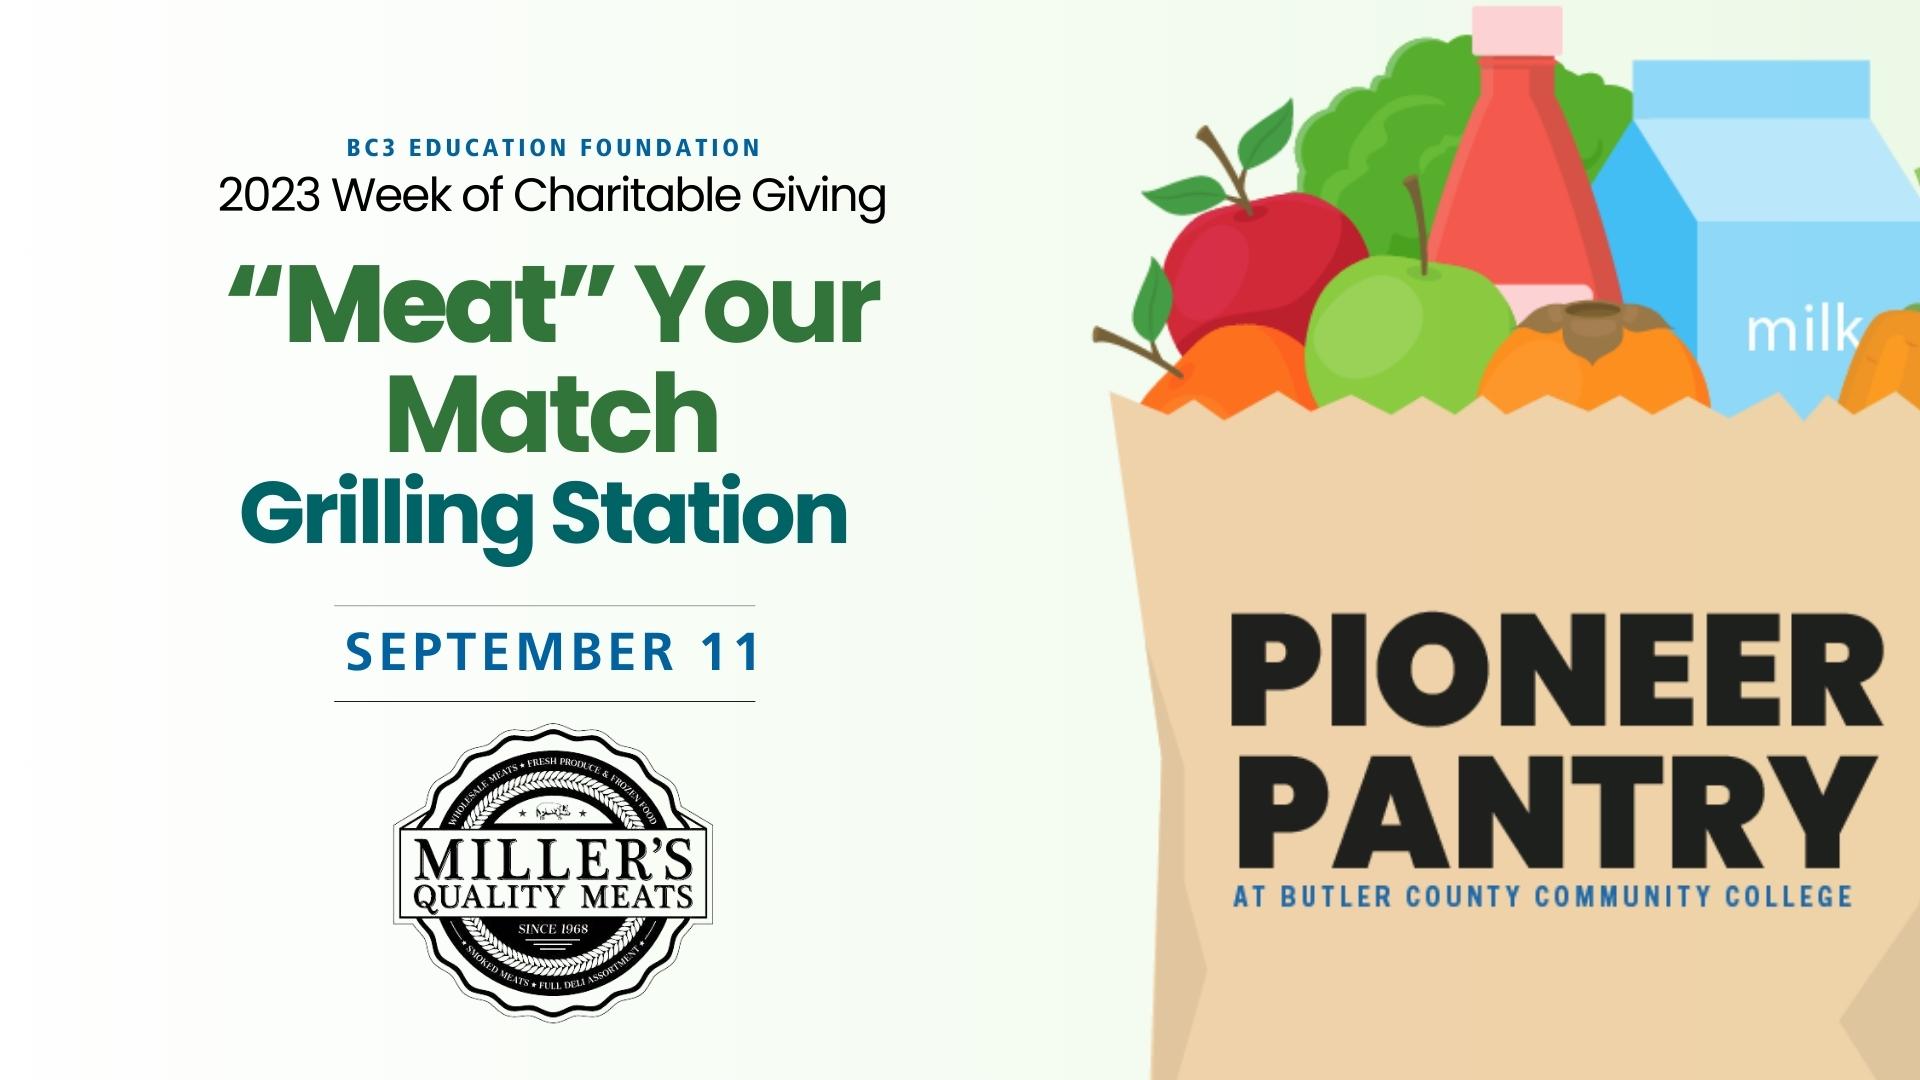 bc3 education foundation 2023 week of charitable giving september 11 Meat your match grilling station